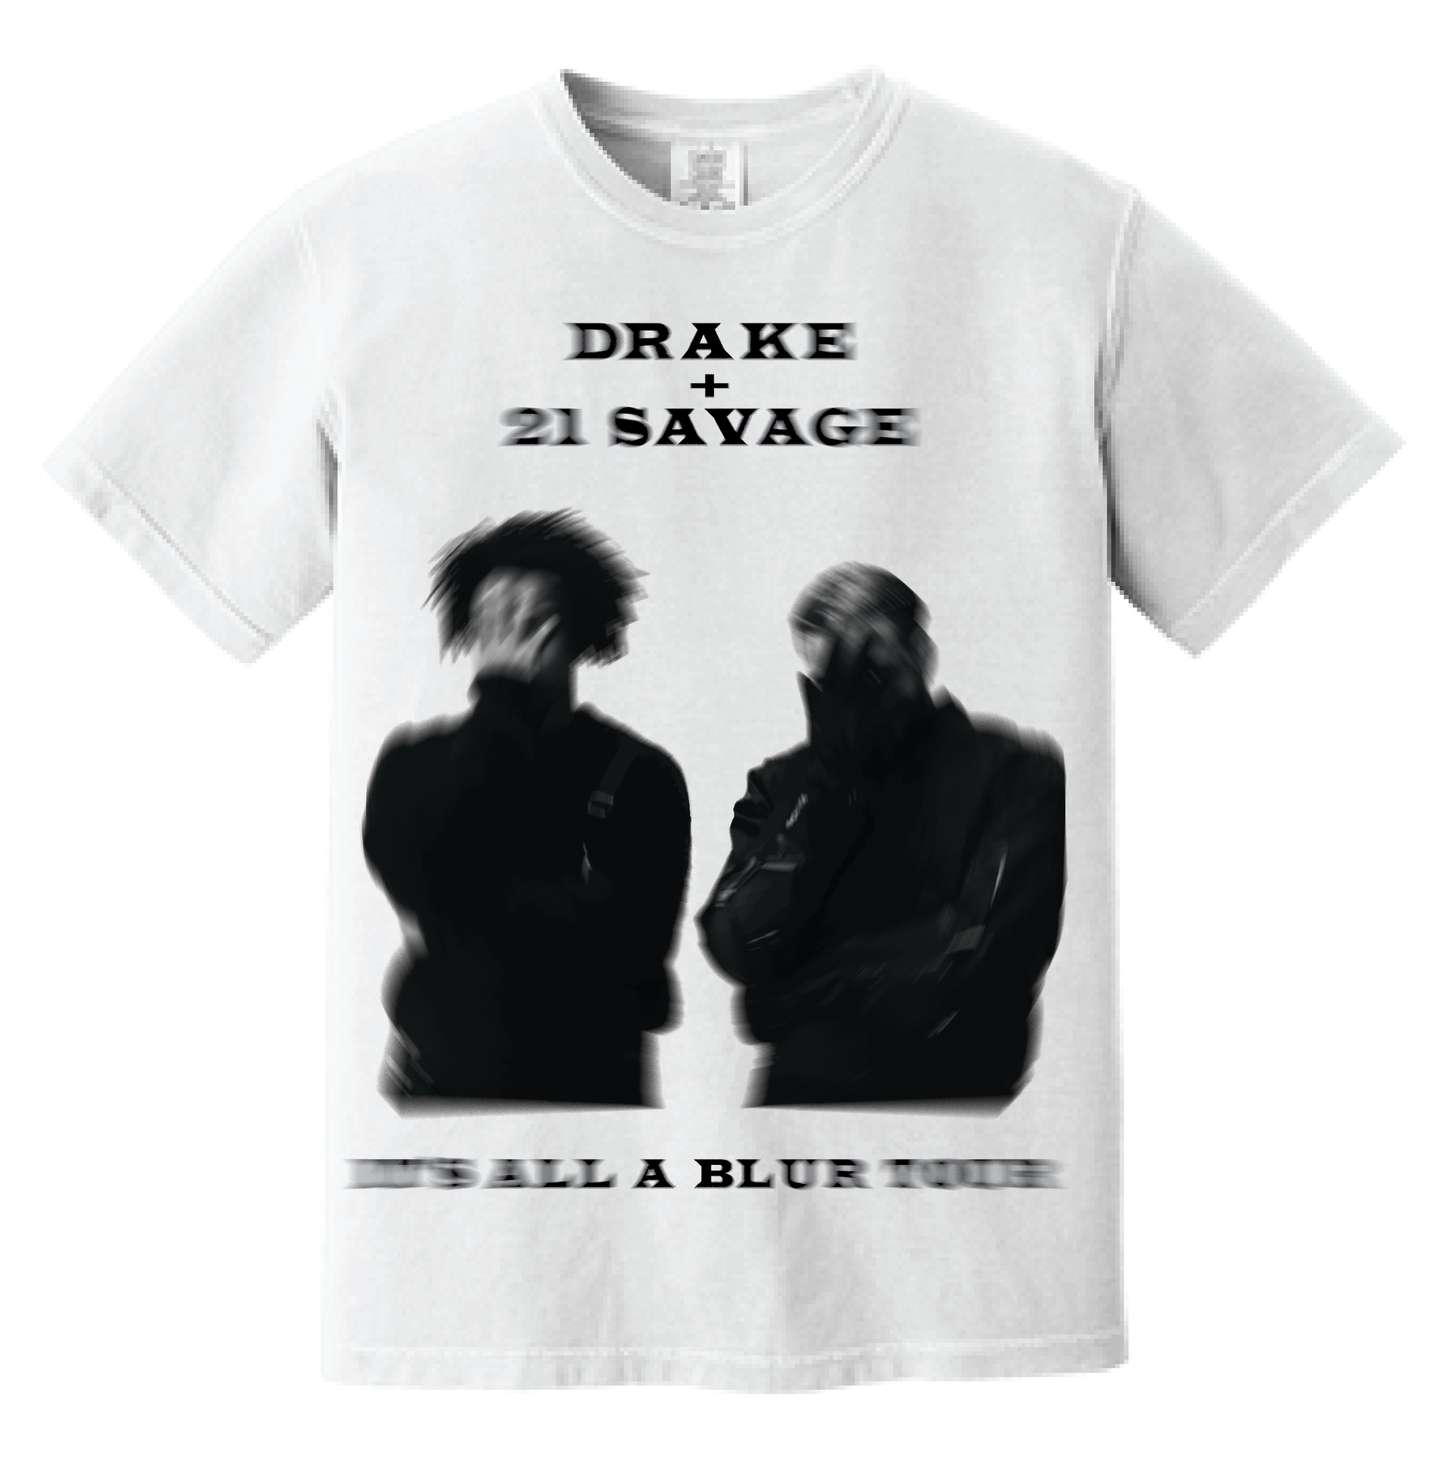 Drake and 21 Savage It's All A Blur Tour T-shirt